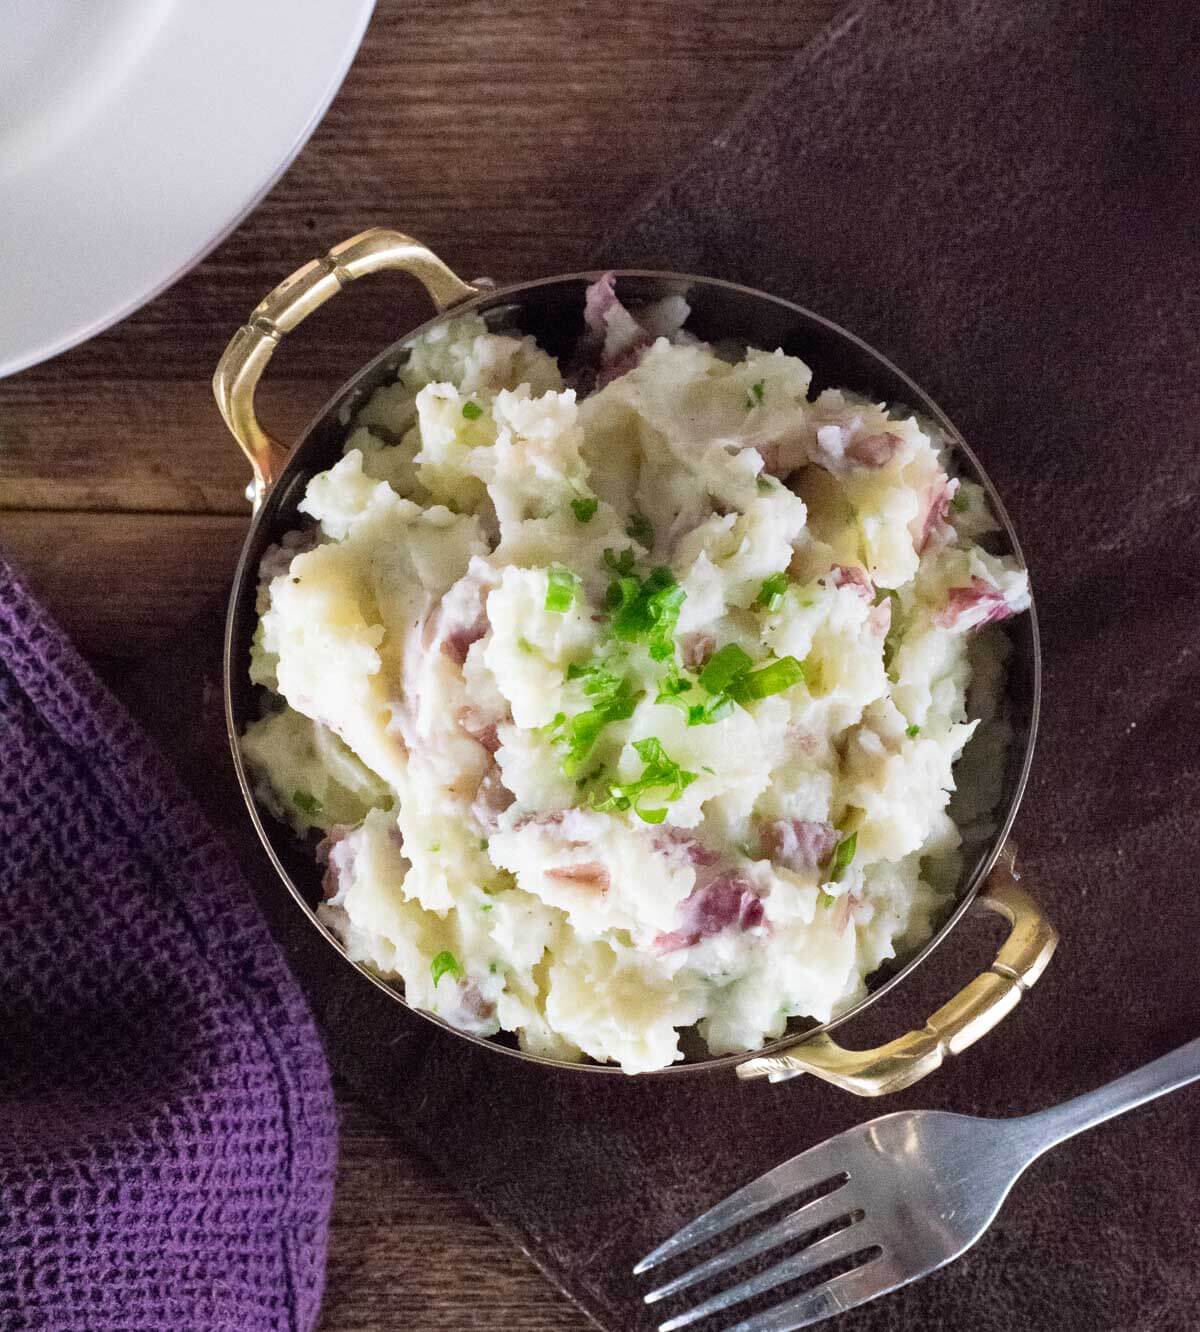 Mashed red potatoes on table viewed from above.